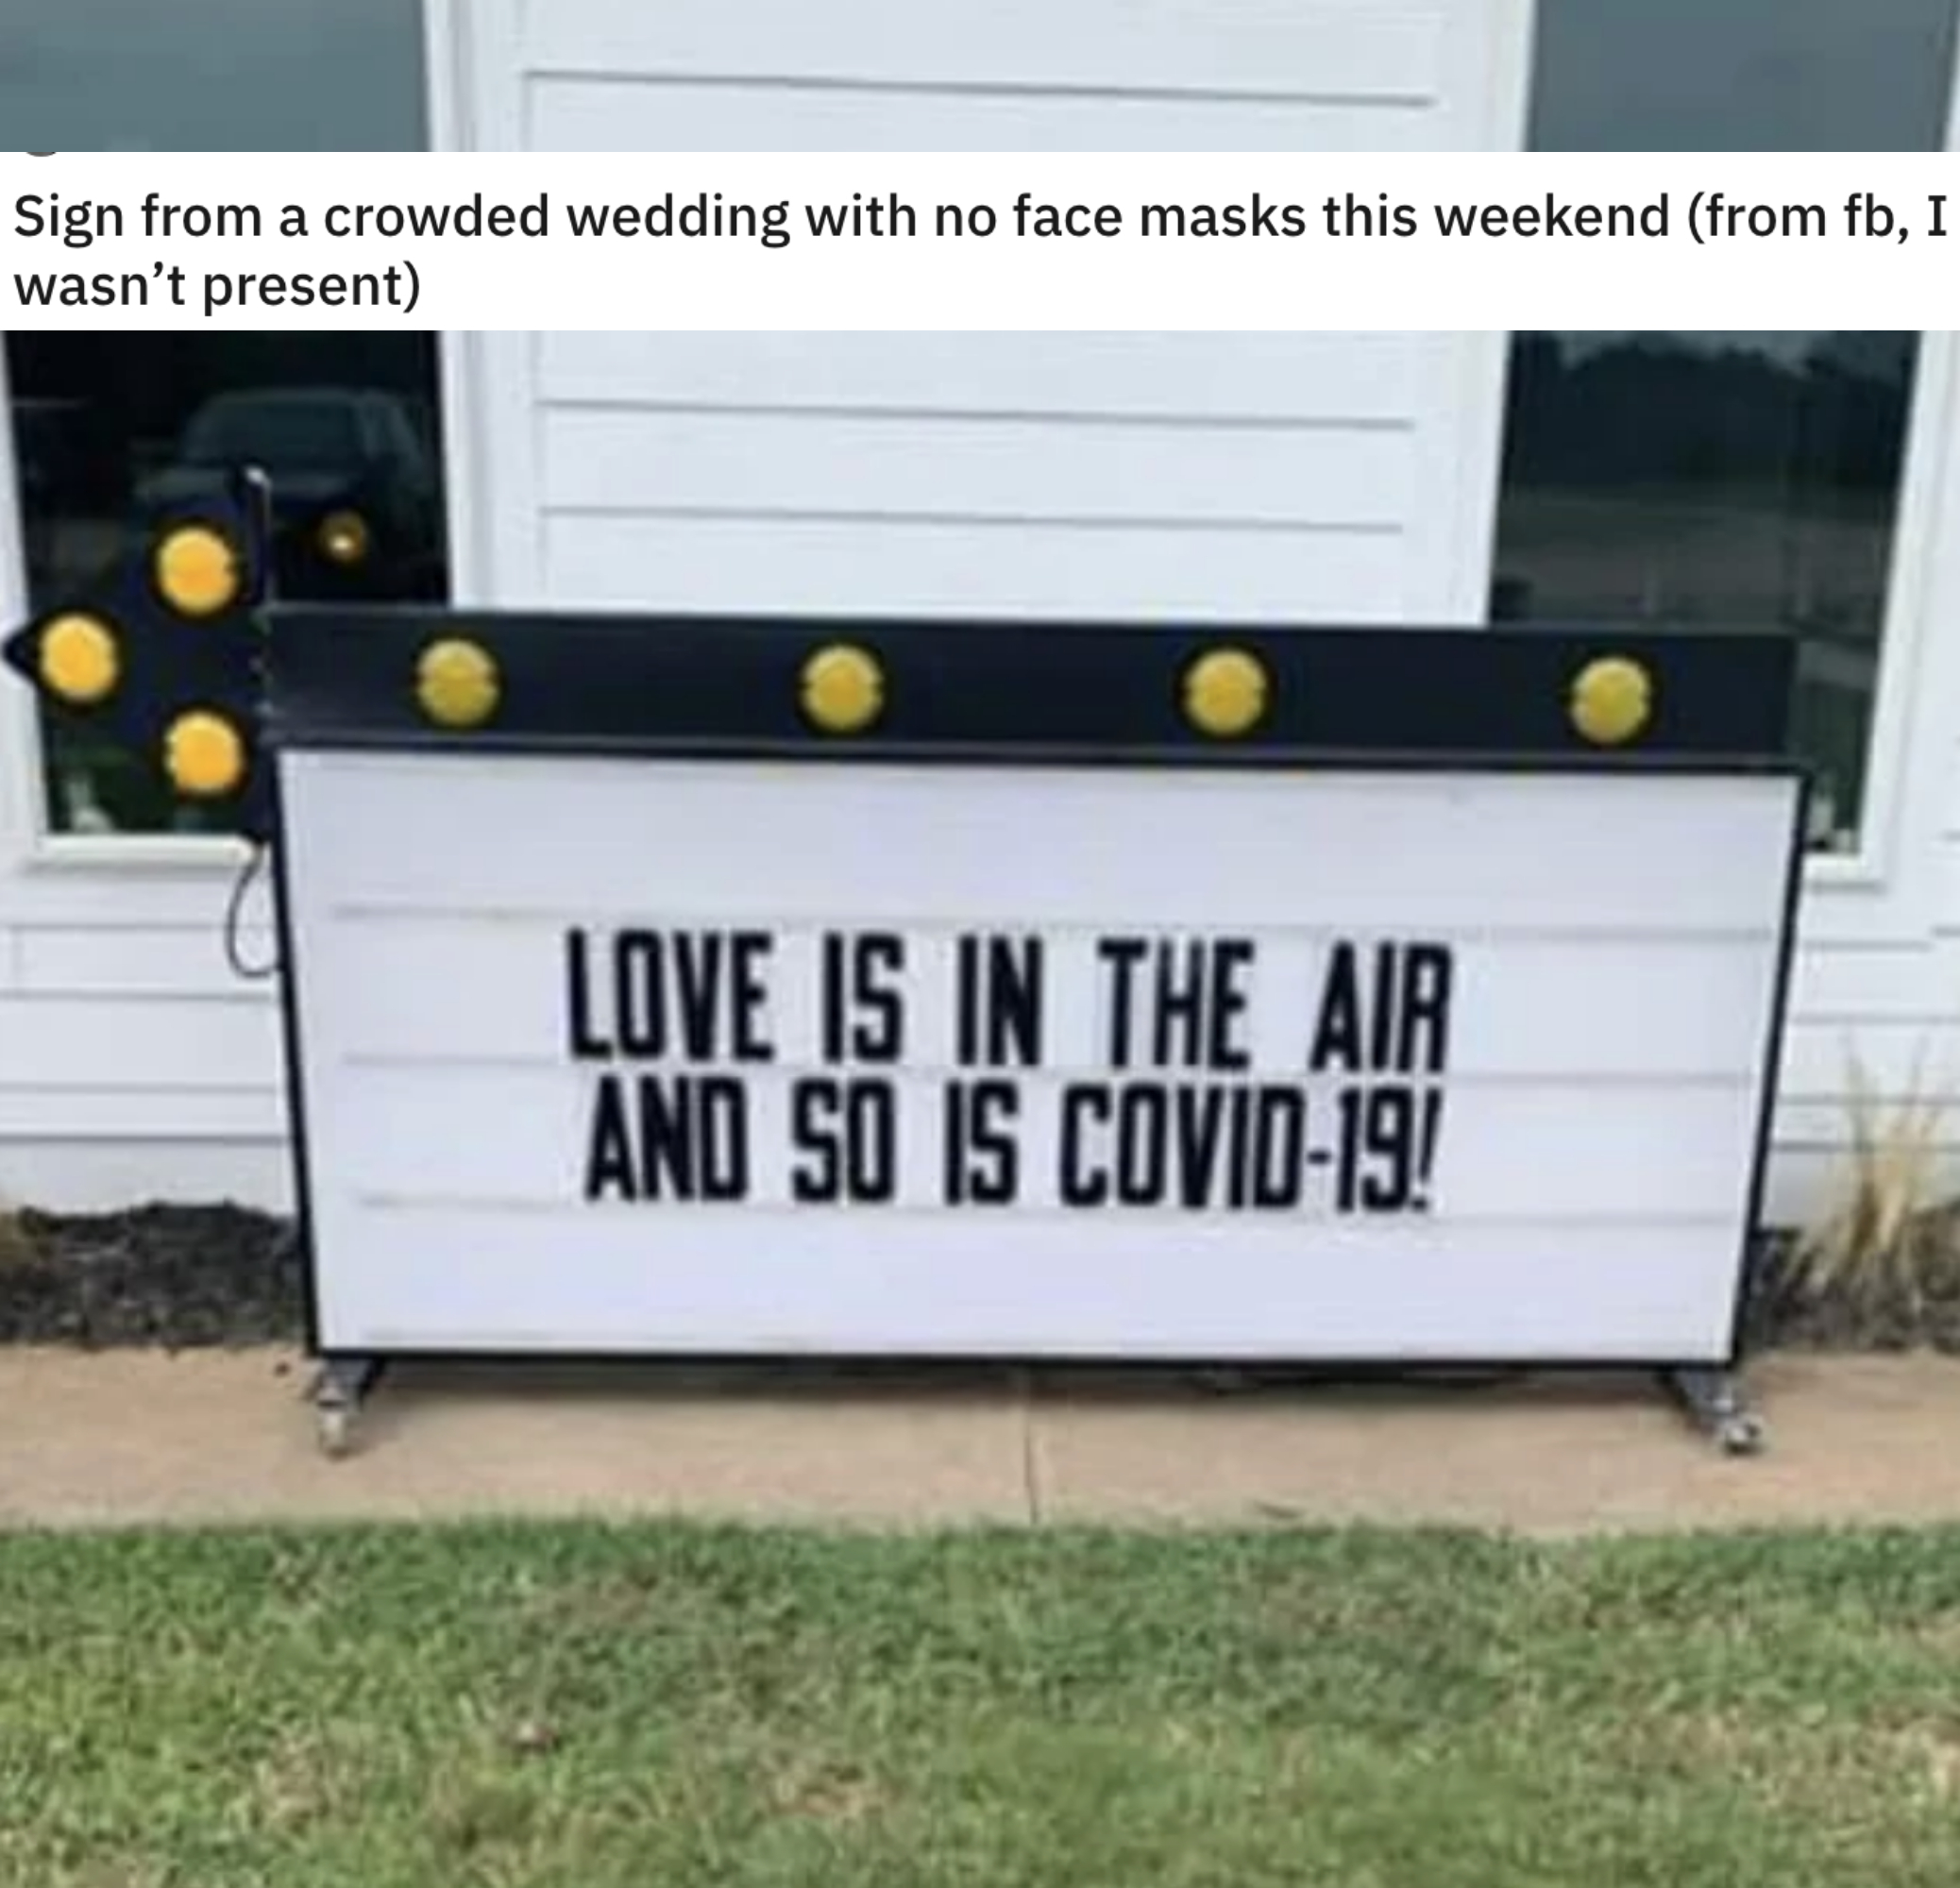 The sign outside the venue says &quot;love is in the air and so is COVID-19&quot;